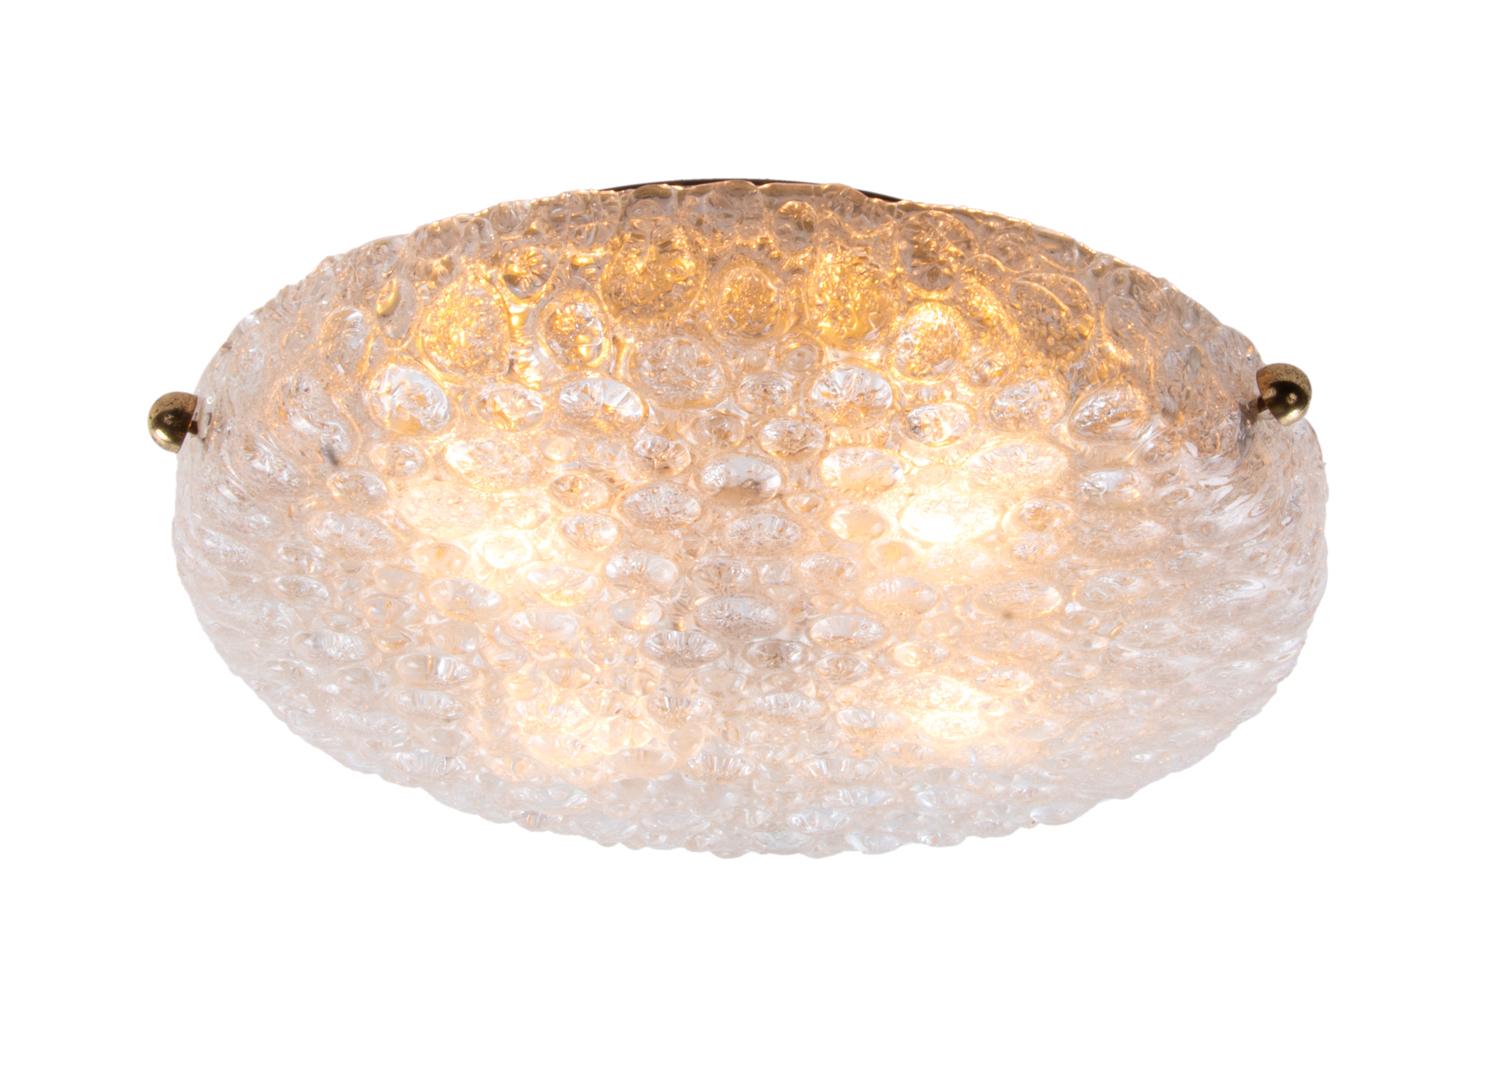 Elegant wall or ceiling light with a murano bubble glass shade on a brass frame.
The fixture illuminates beautifully. Gem from the time. With this light you make a clear statement in your interior design. A real eye-catcher even unlit. Made by